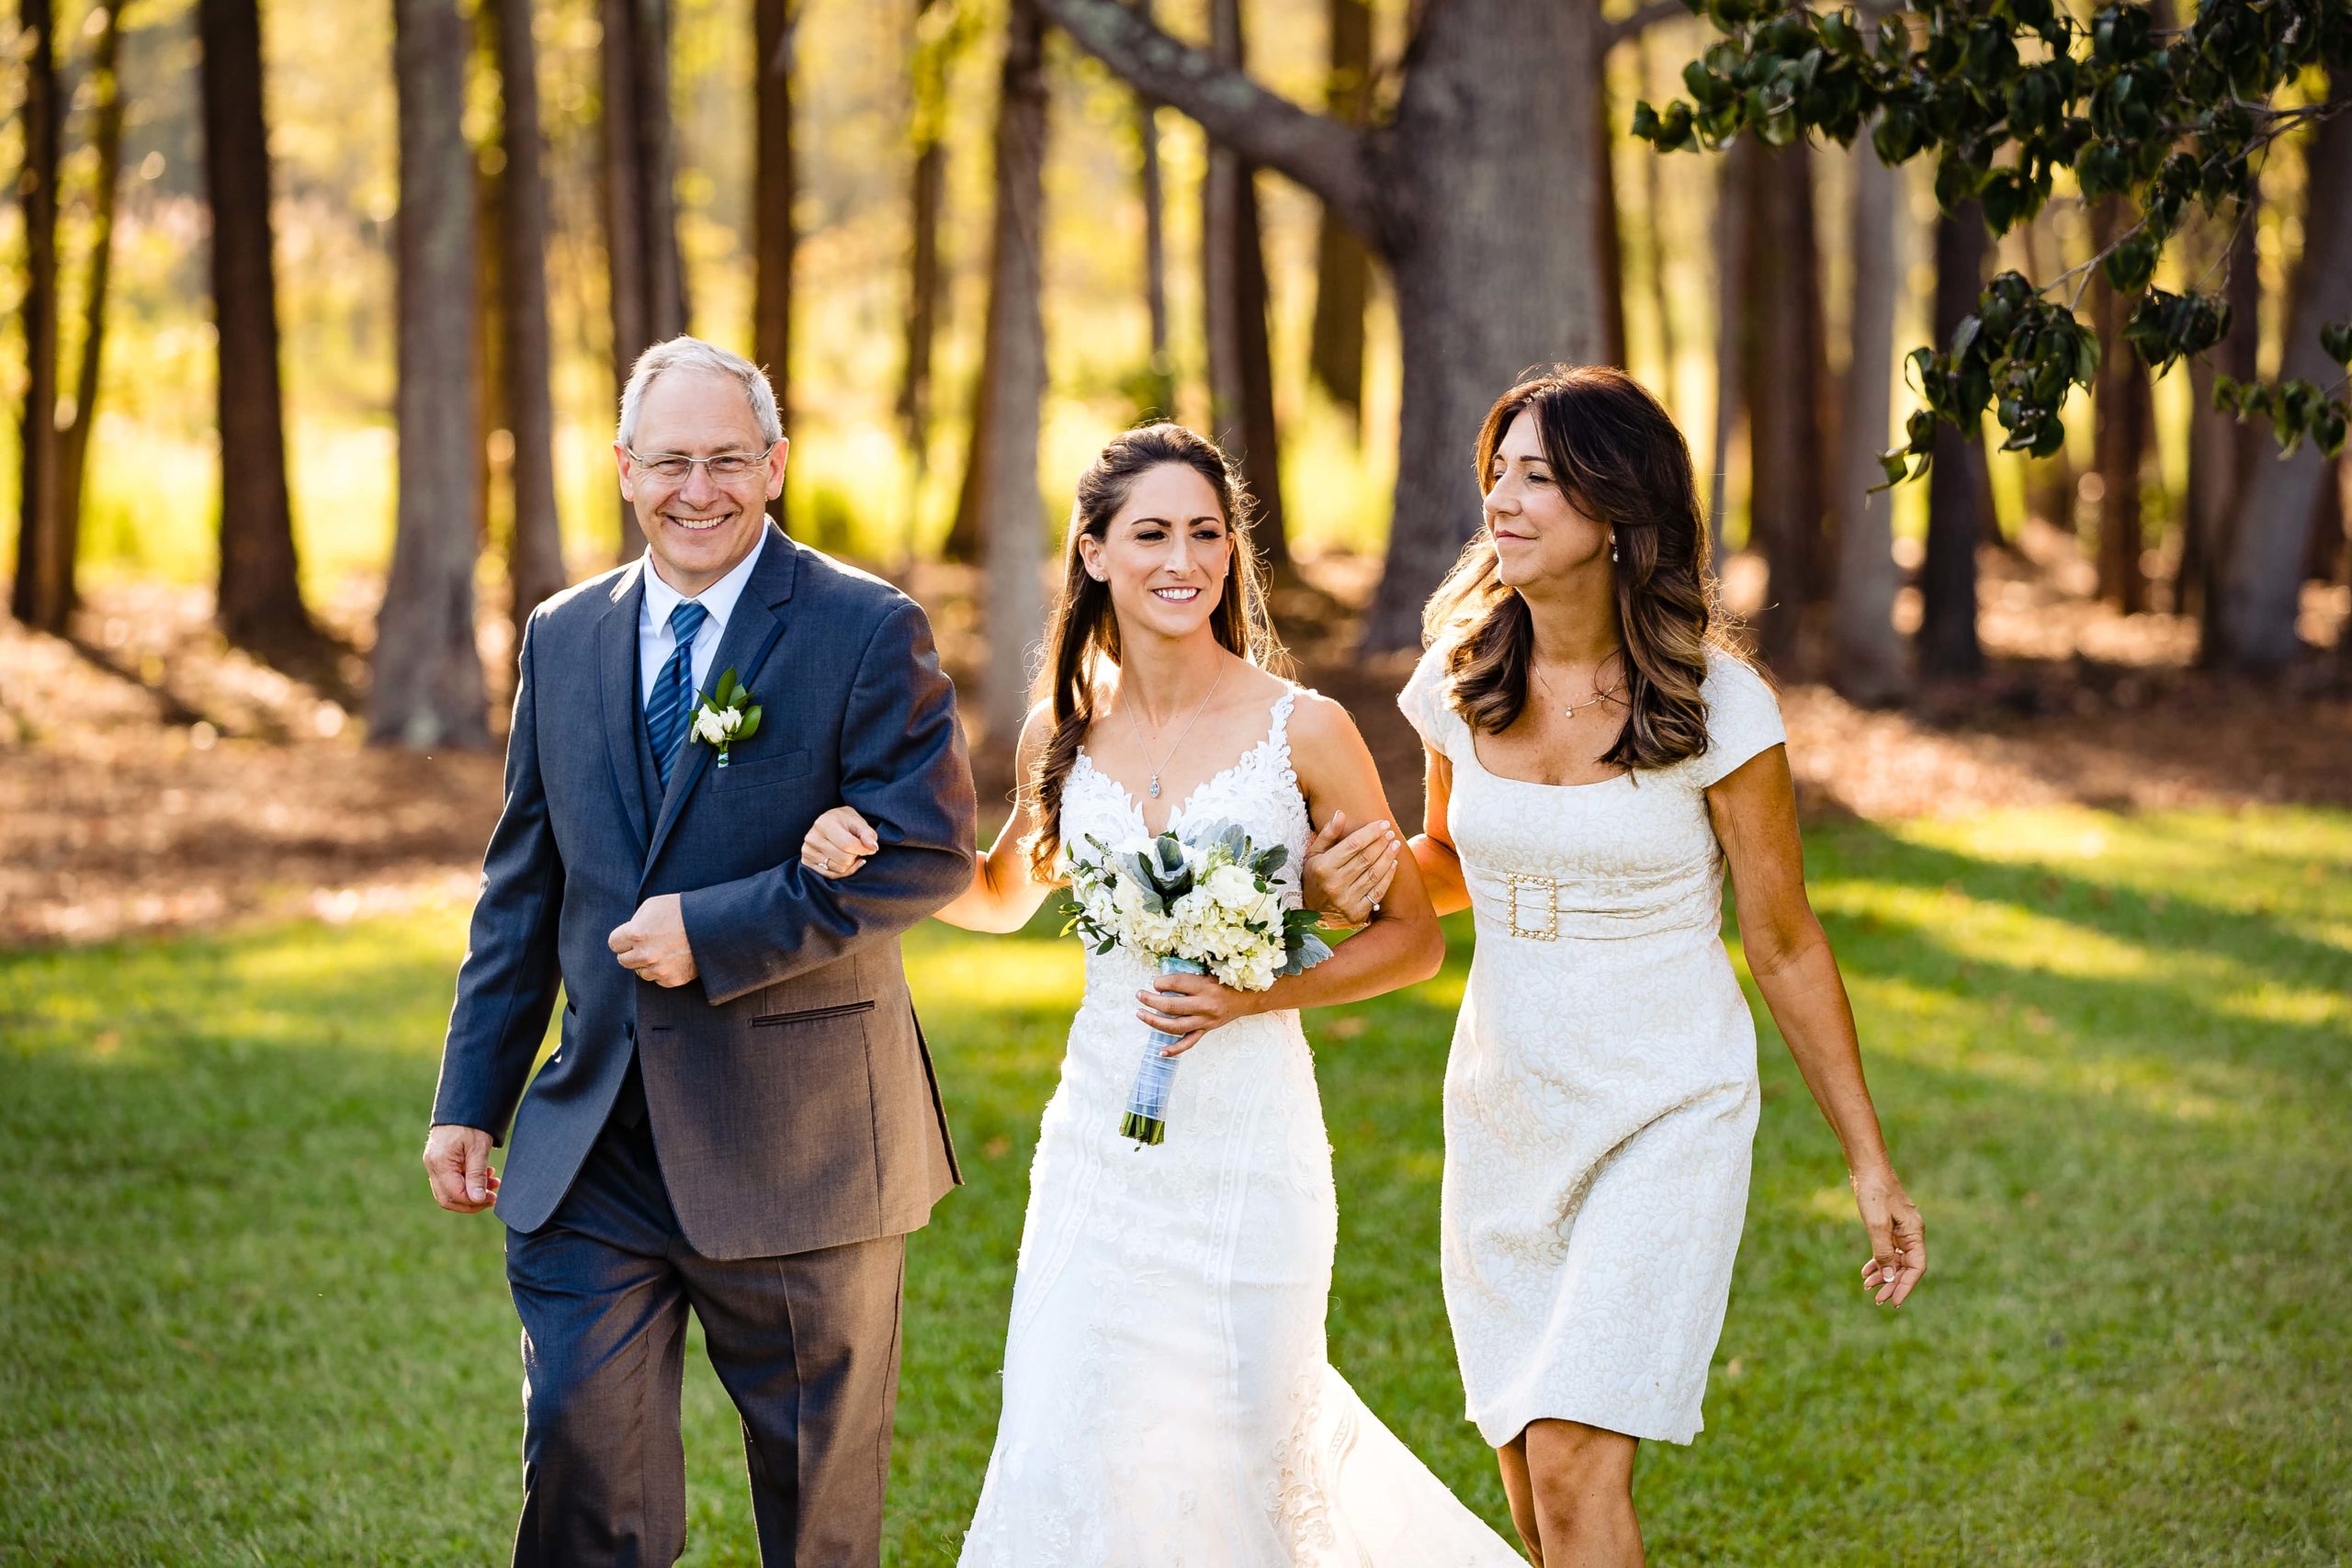 If you have two photographers at your wedding, you can get both angles of the first look and the walk down the aisle - here, one photographer has captured the bride walking in with her parents